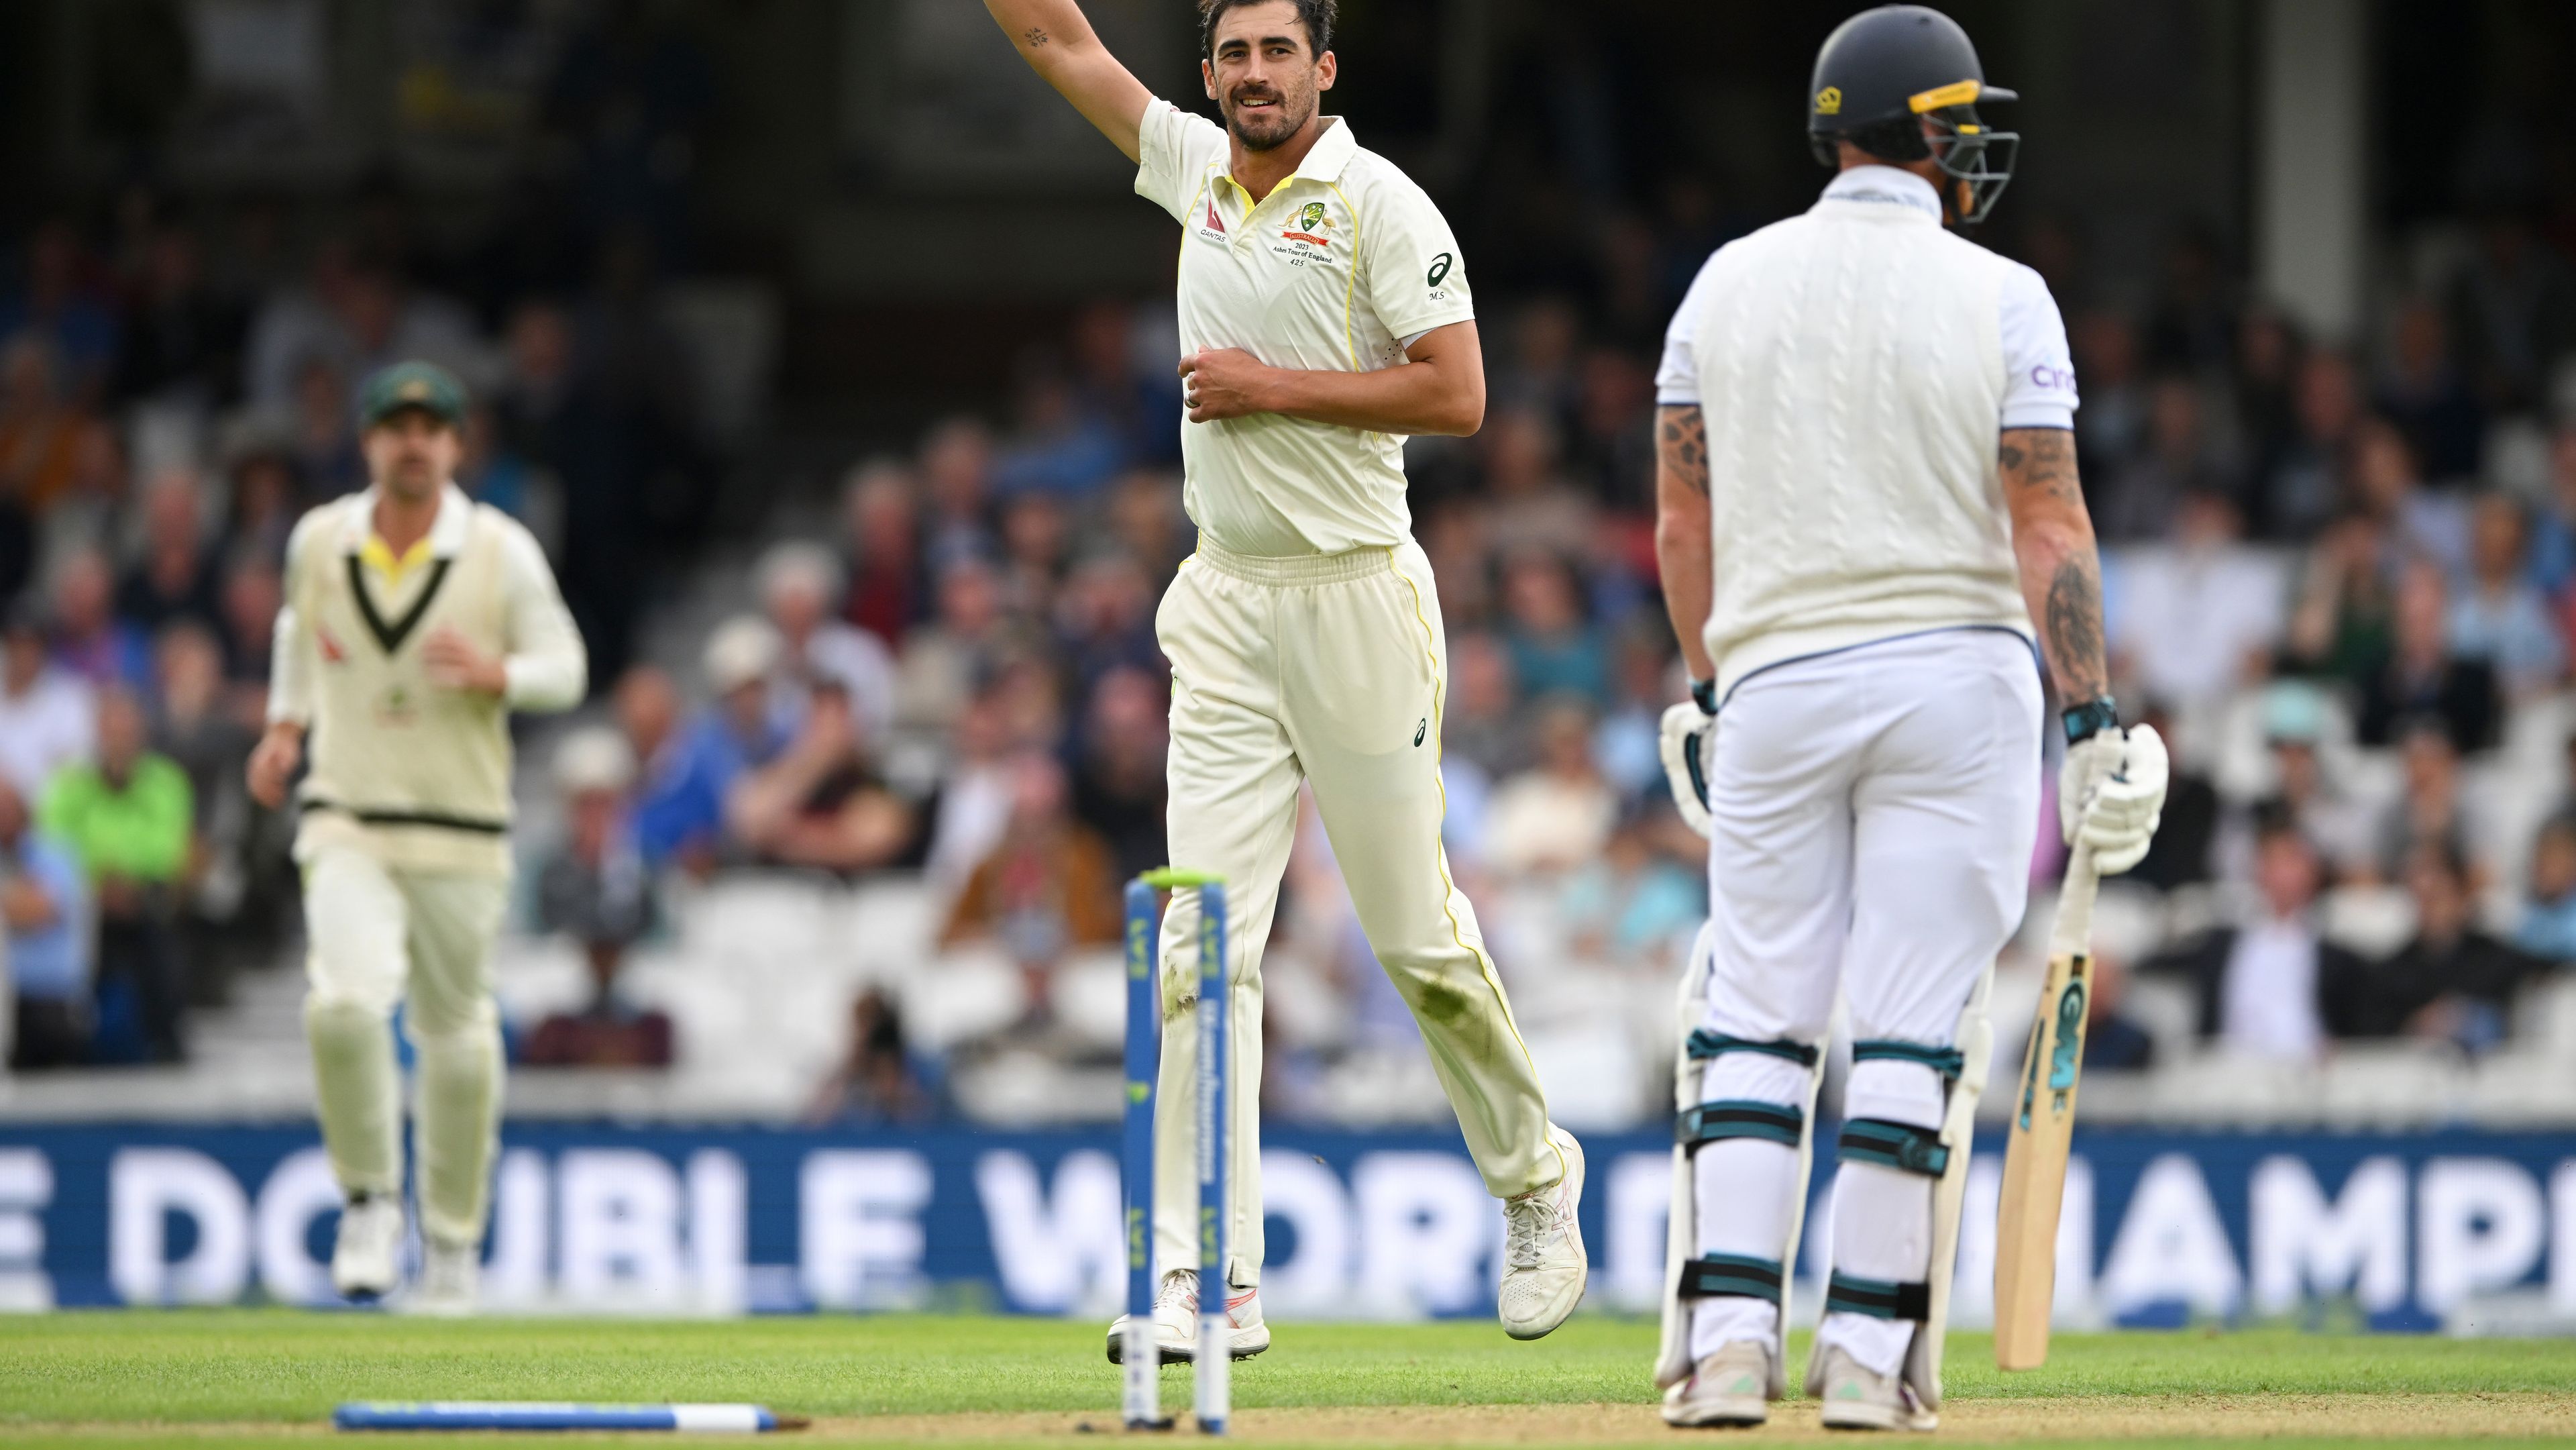 LIVE: Starc 'corker' sends Stokes packing at The Oval